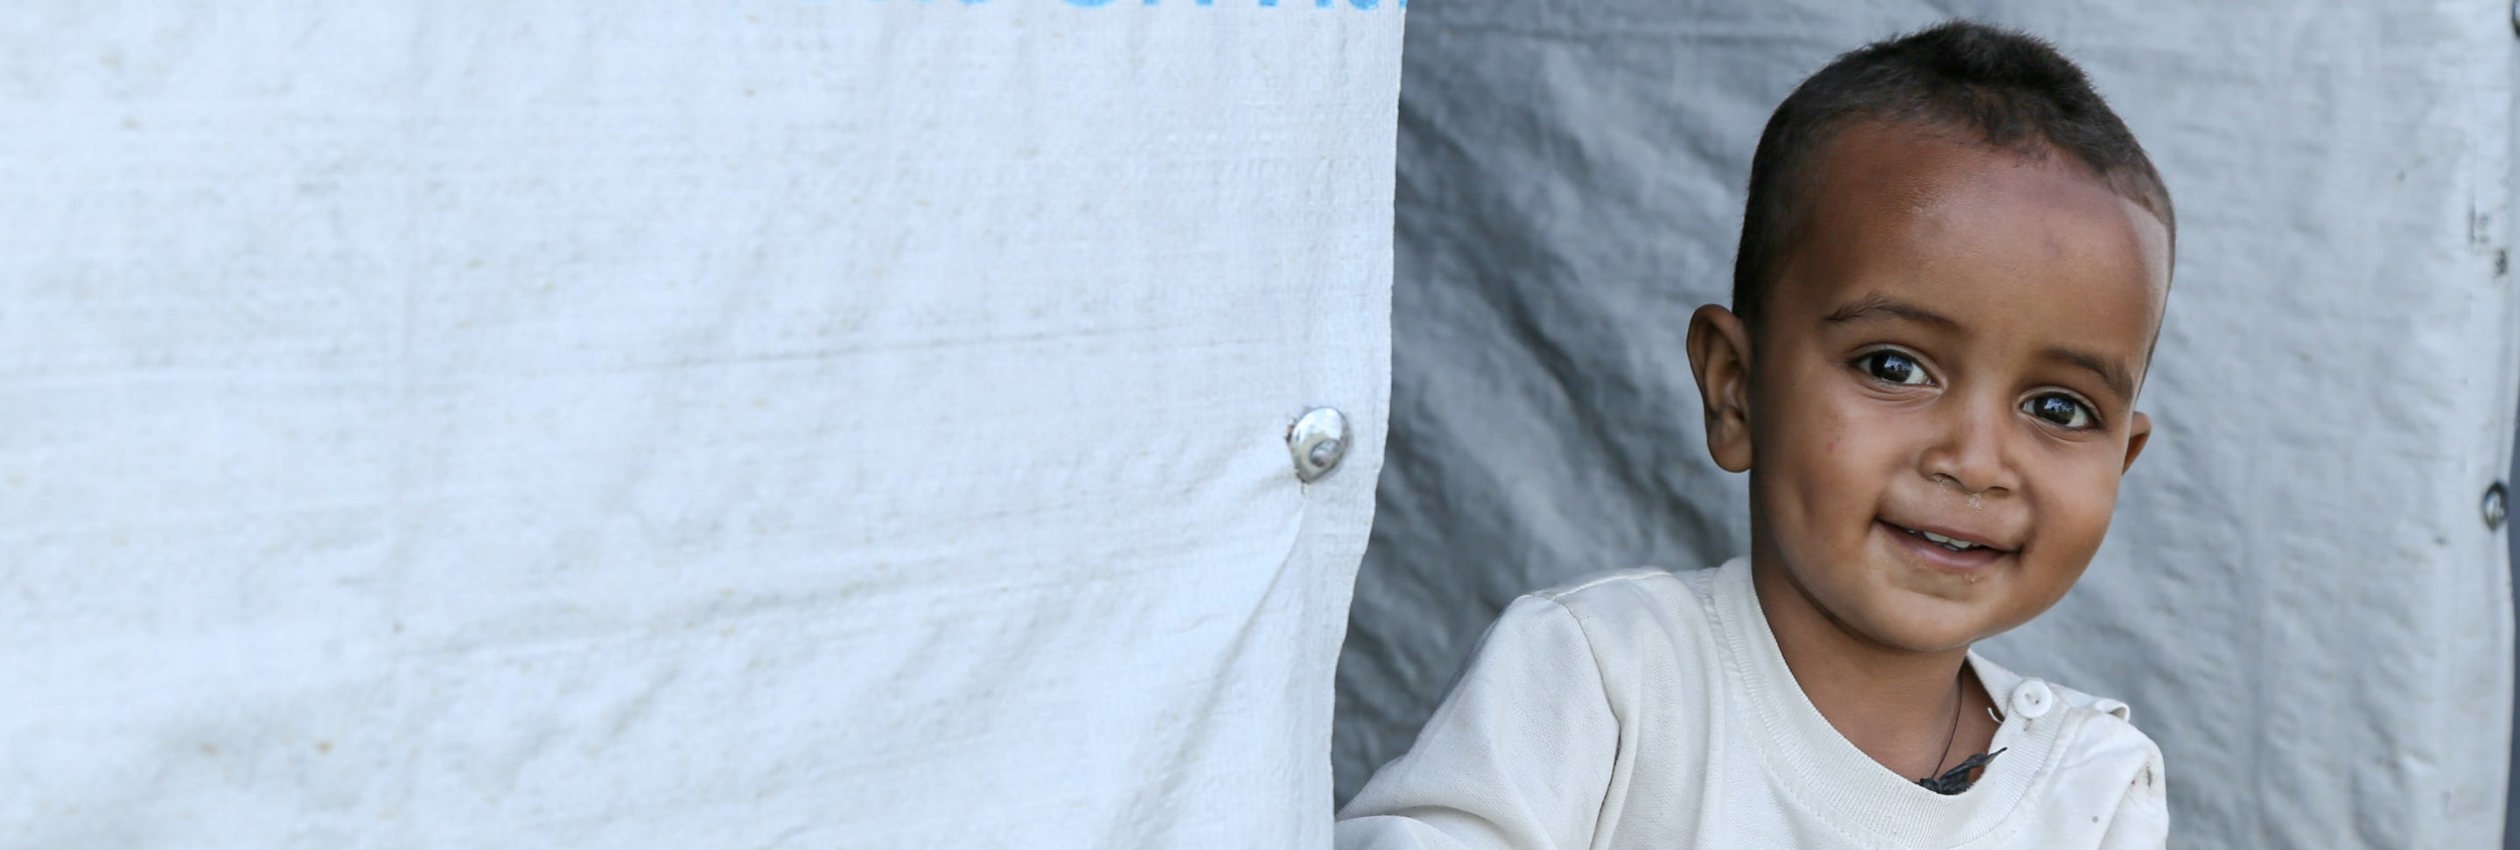 Ethipian refugee boy looks out from UNHCR tent